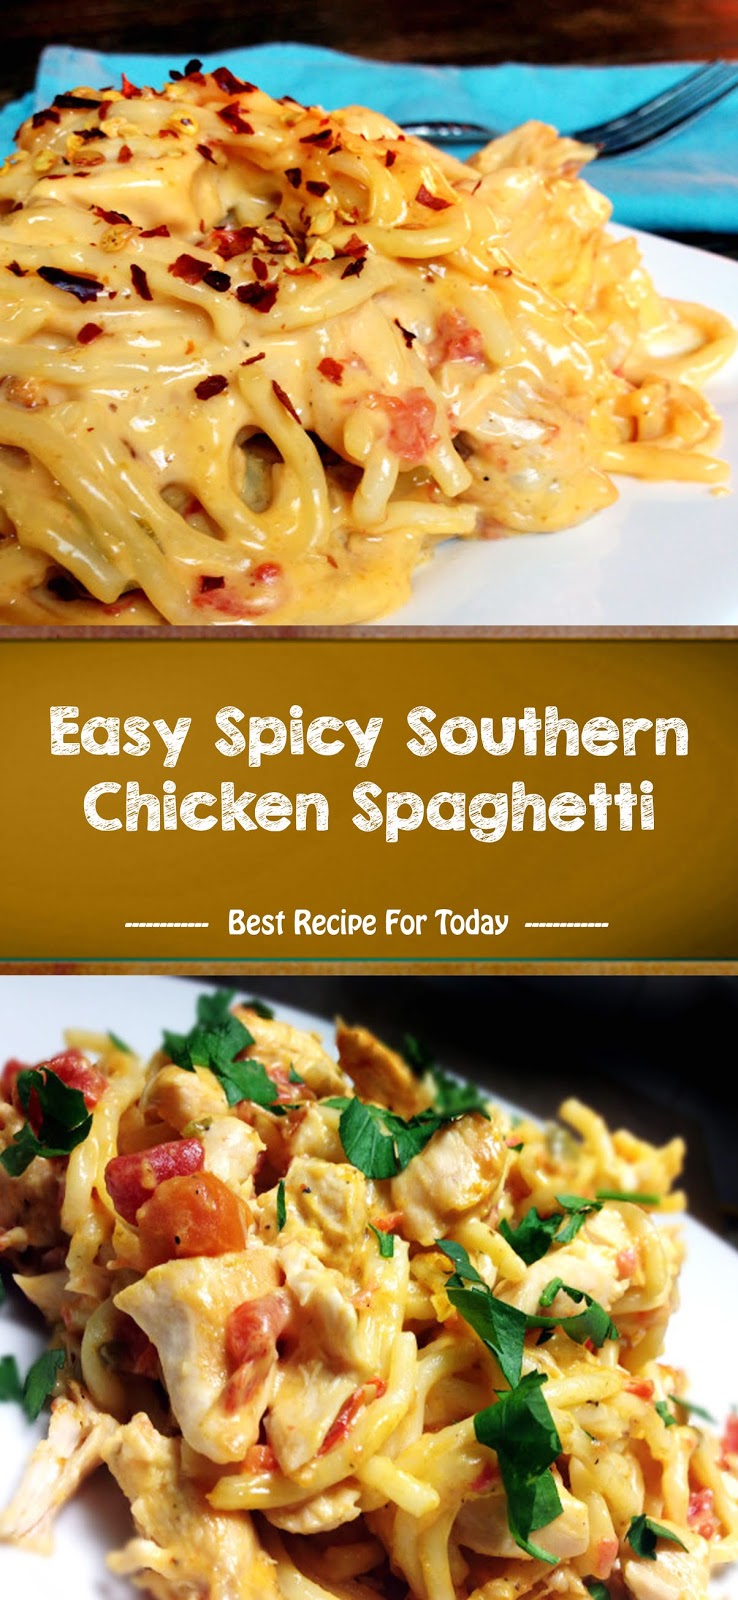 Easy Spicy Southern Chicken Spaghetti - Jolly Lotus